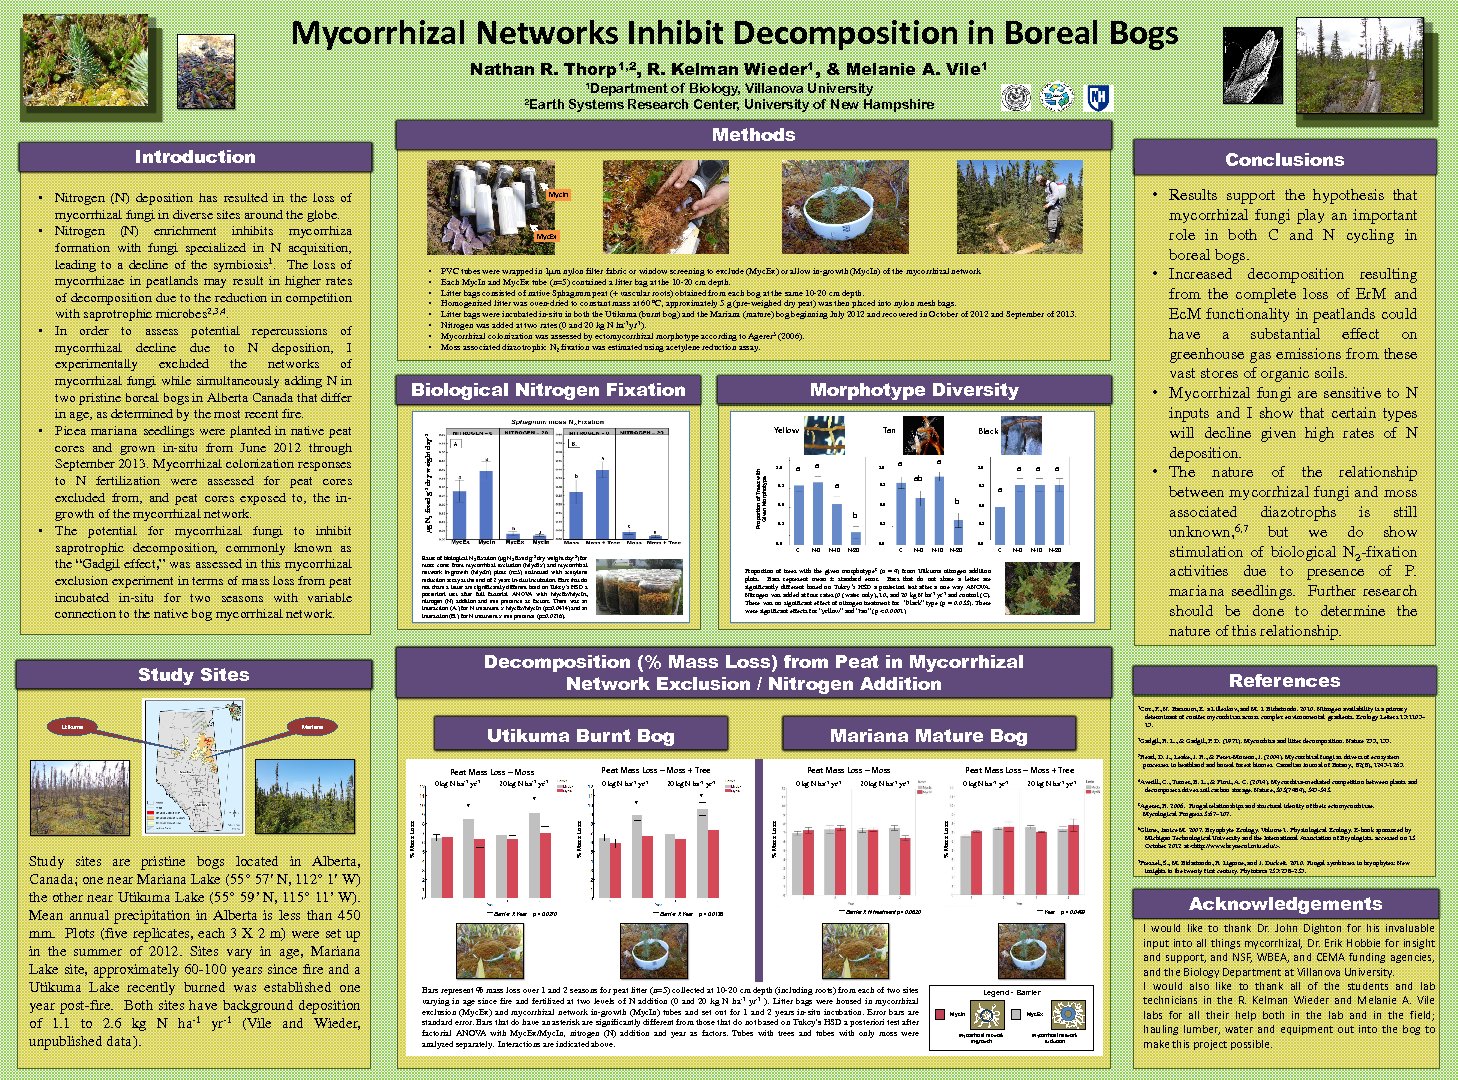 Mycorrhizal Networks Inhibit Decomposition In Boreal Bogs by nthorp